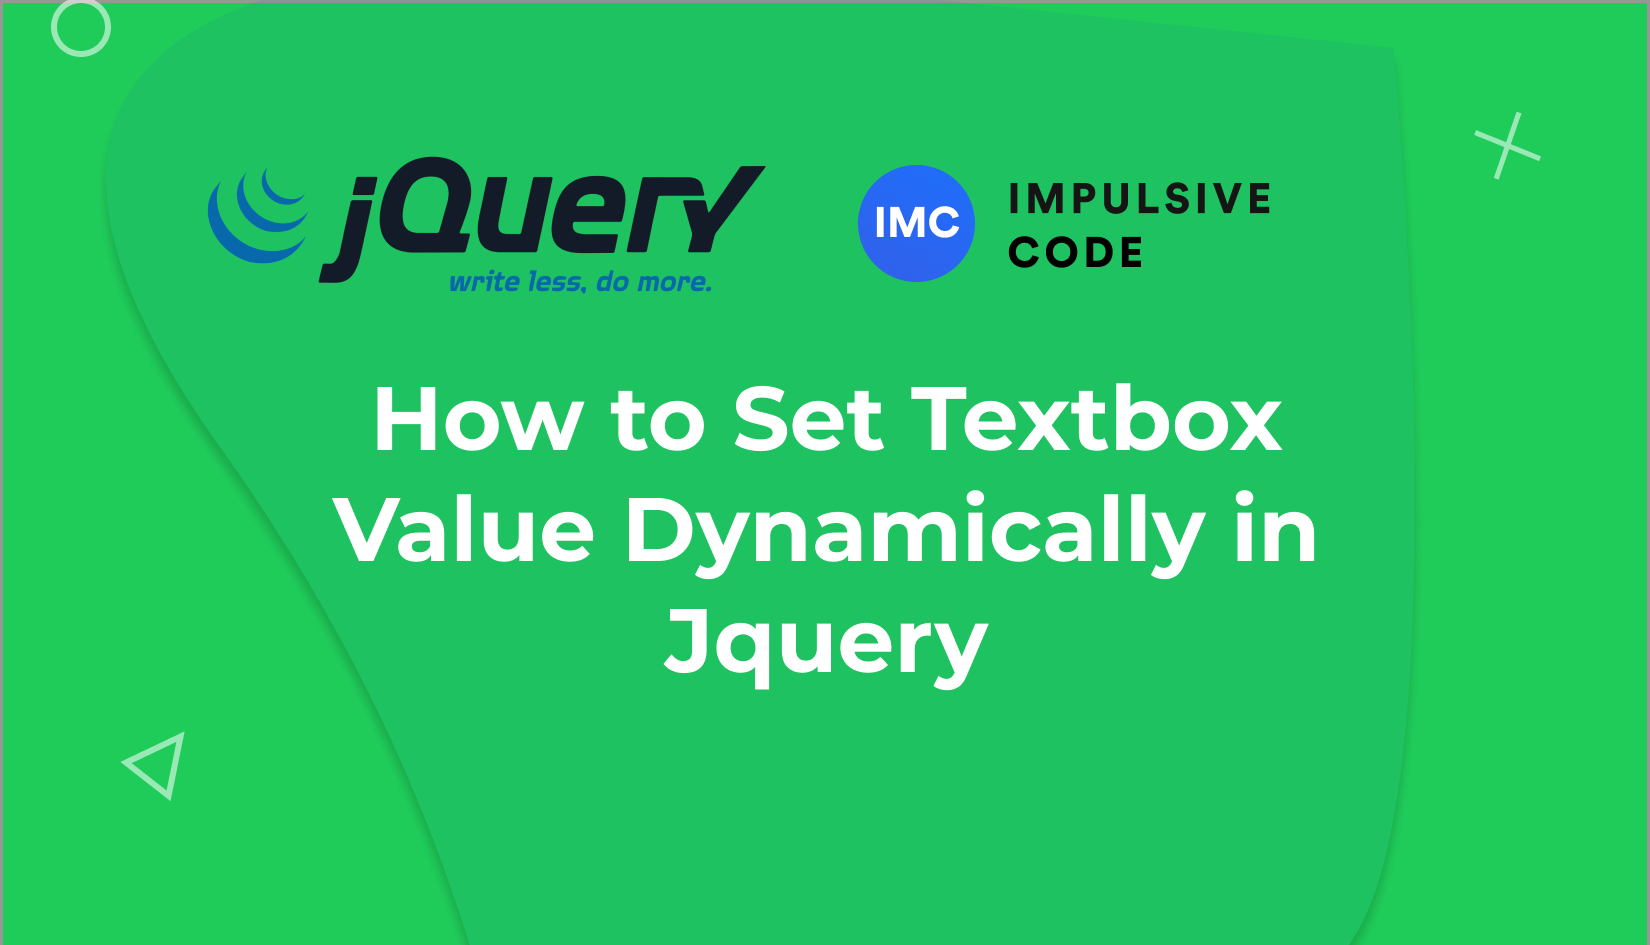 How to Set Textbox Value Dynamically in Jquery